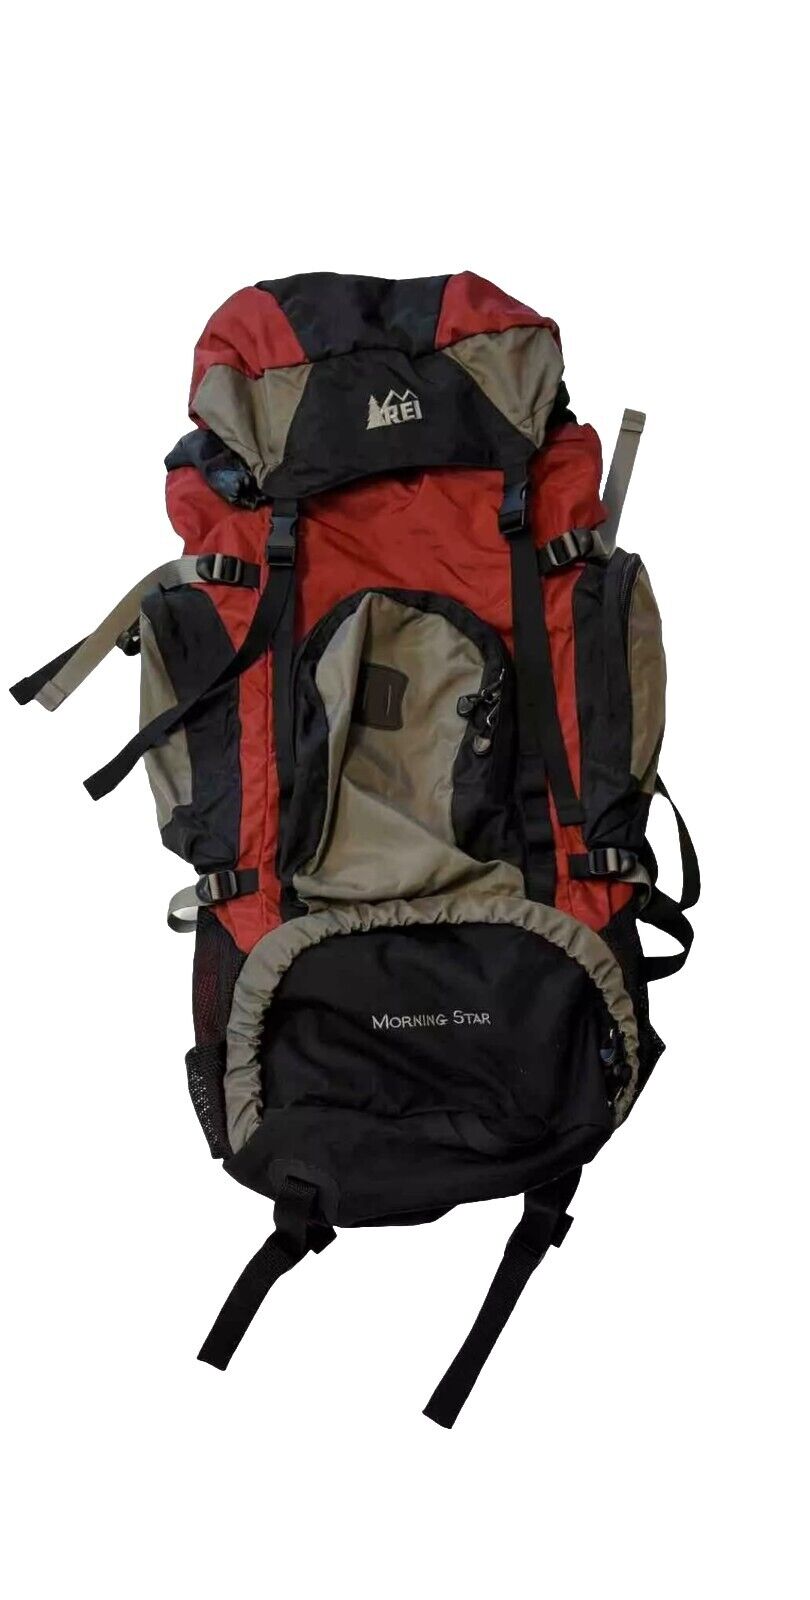 REI Morning Star Hiking Light Weight Day Backpack W/ Cover & Frame BACKPACKING S